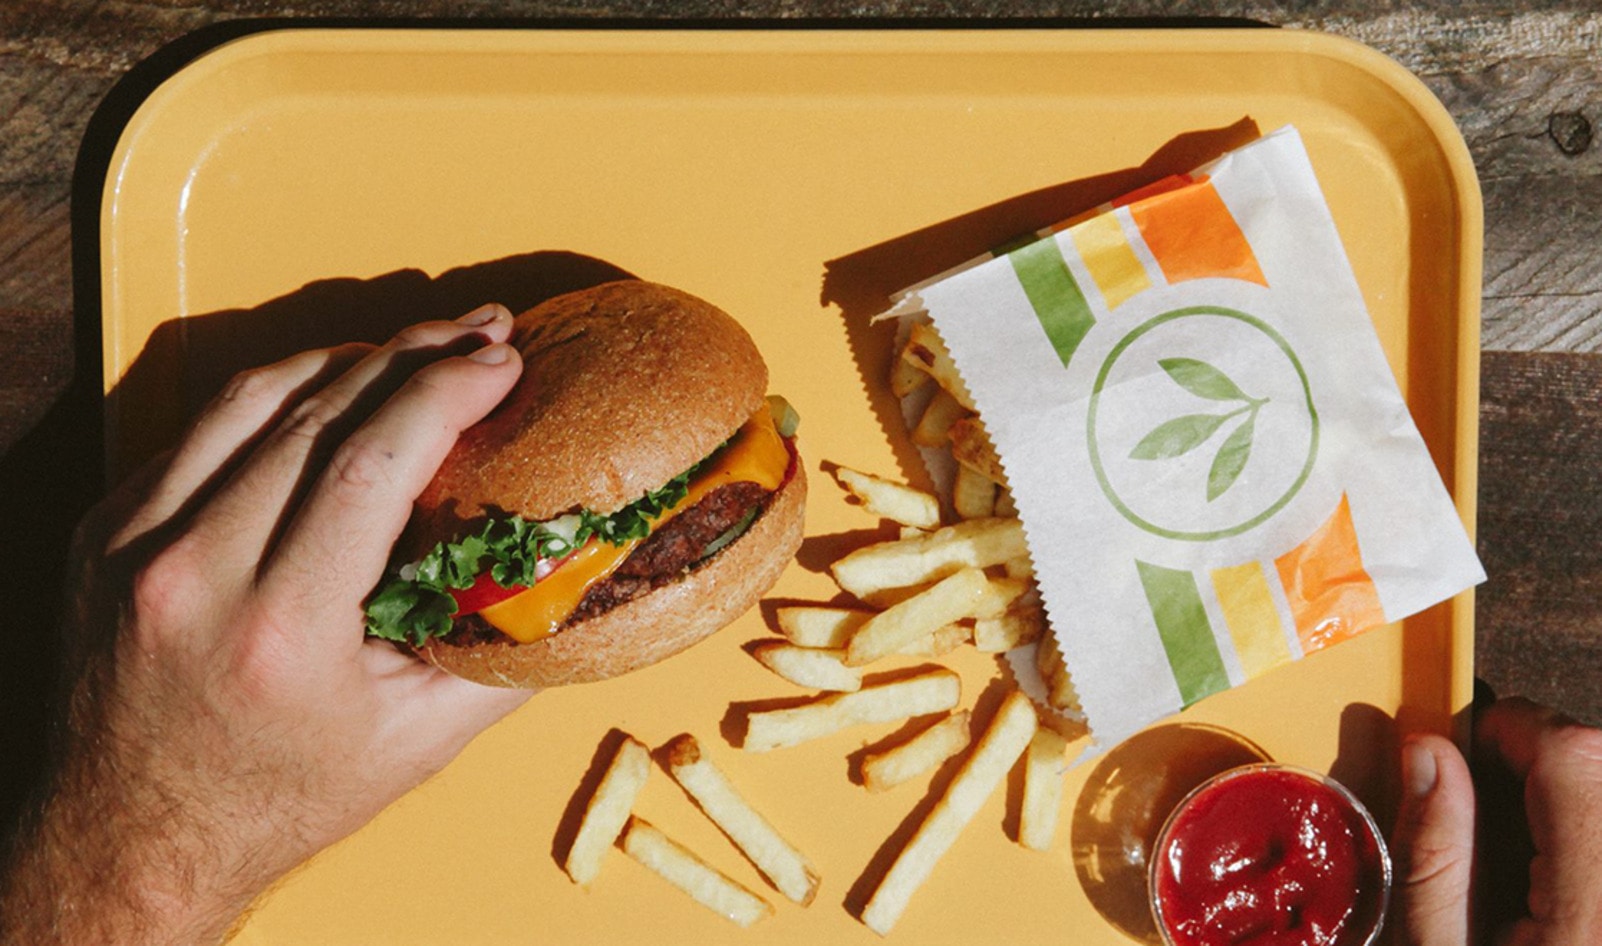 Vegan Chain Plant Power Fast Food Sales Spike by 438 Percent&nbsp;